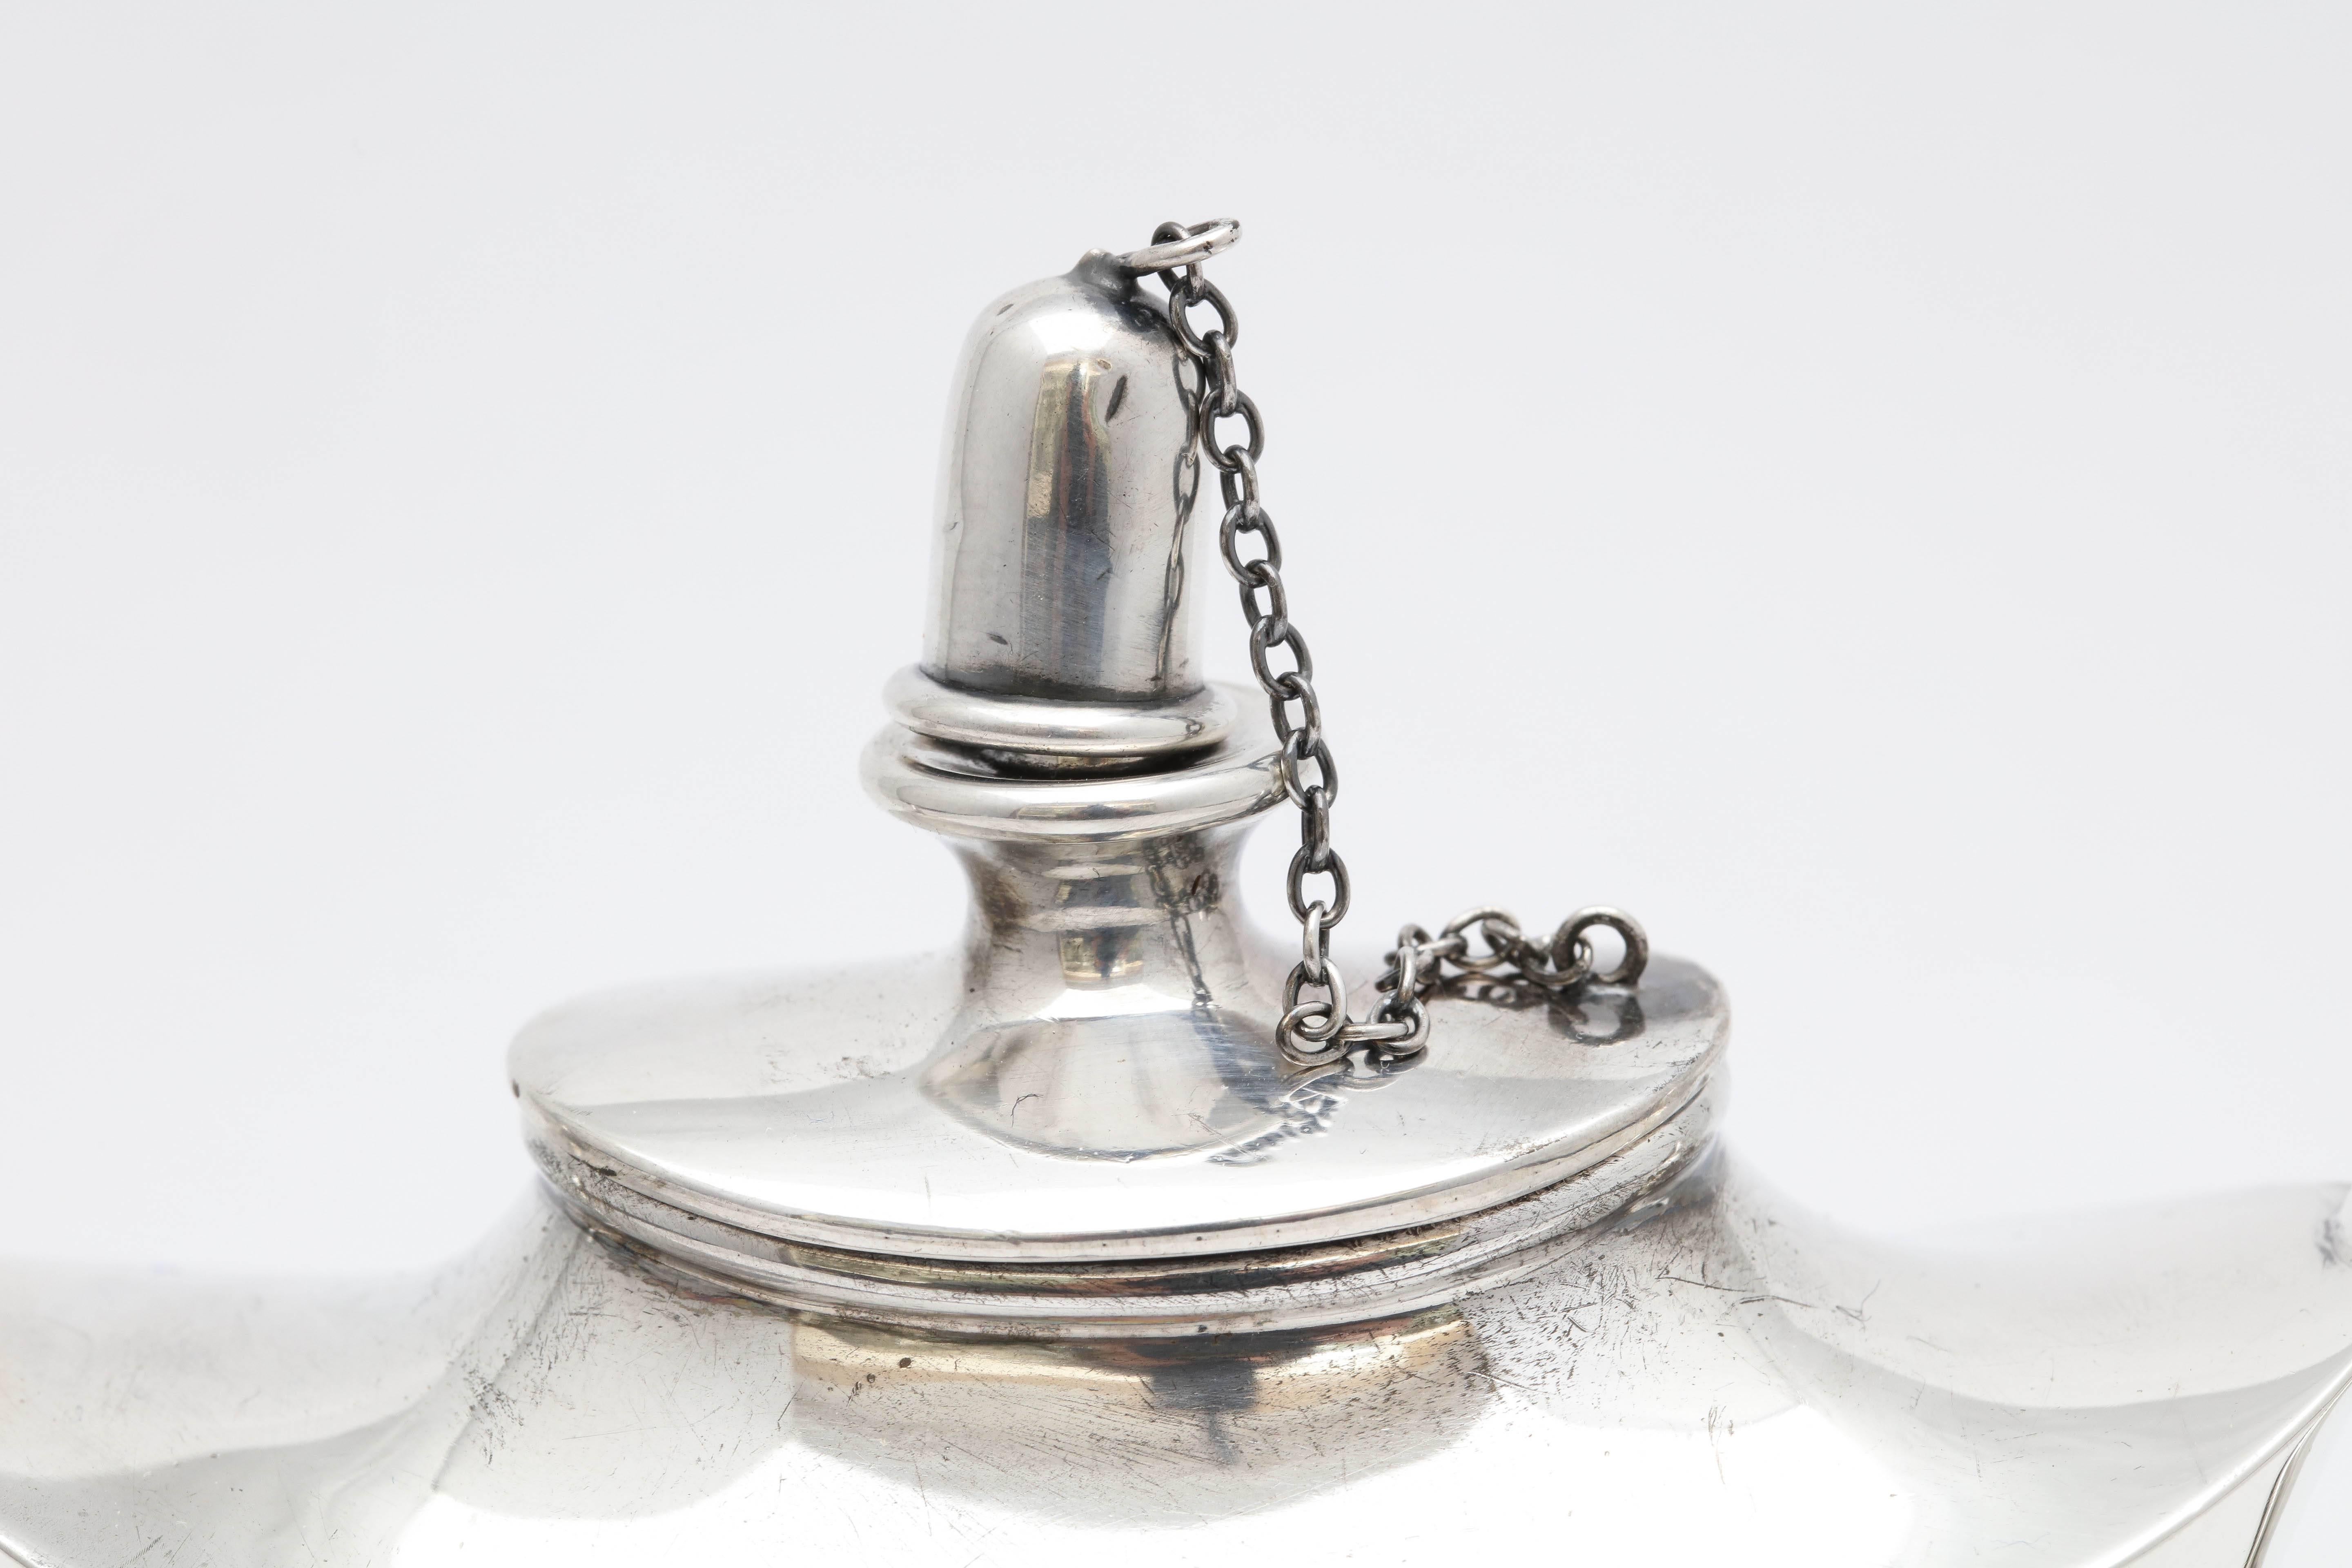 American Edwardian Sterling Silver Aladdin's Lamp-Style Table Oil Lamp or Lighter